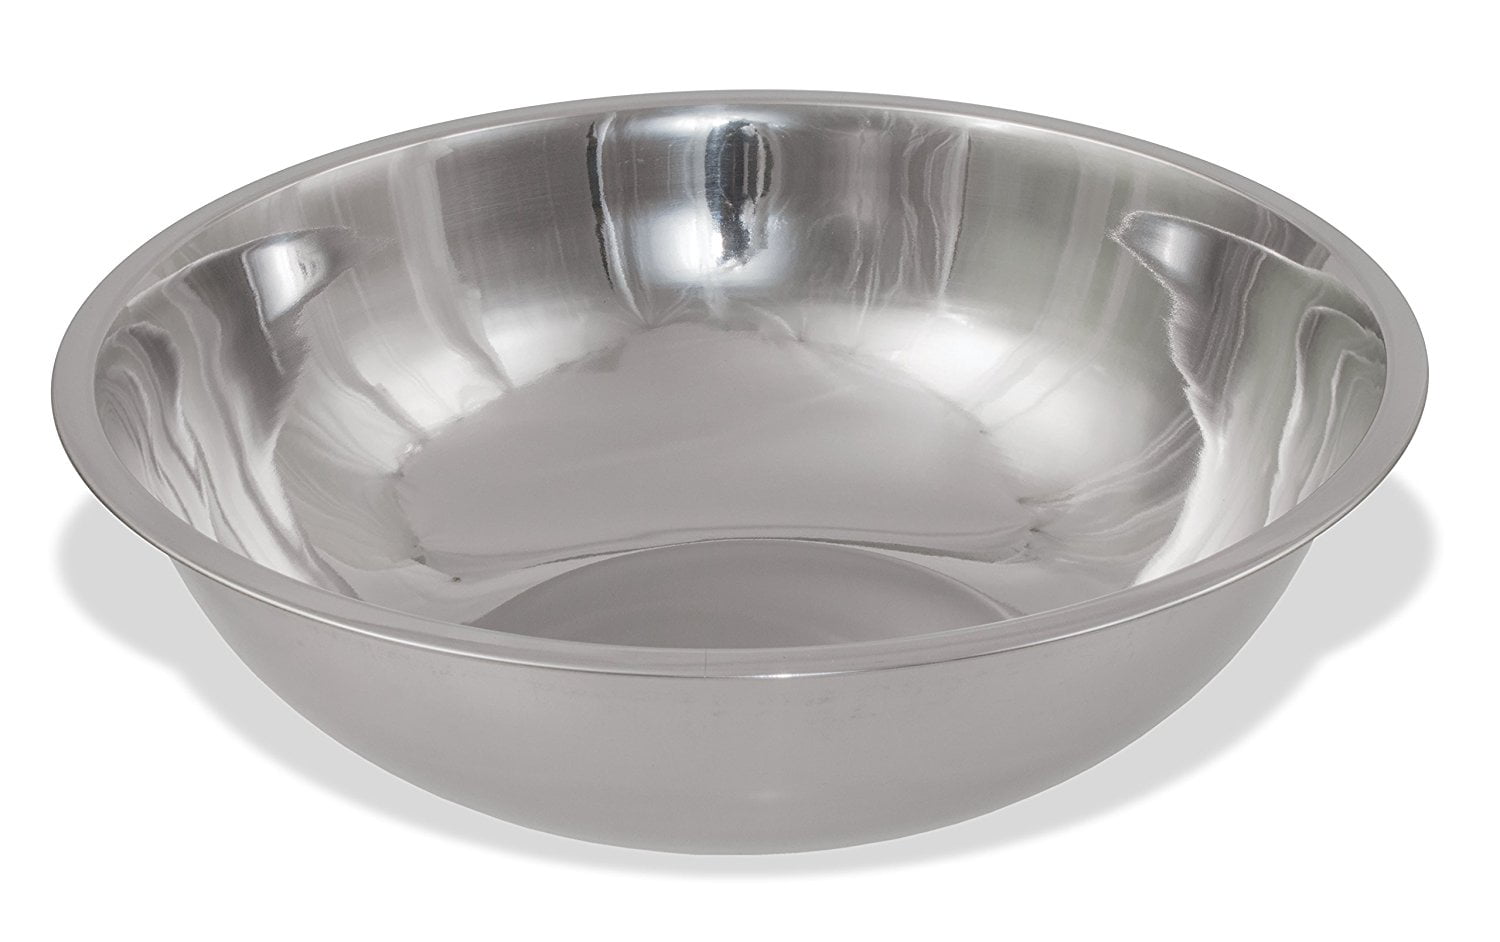 professional stainless steel mixing bowls